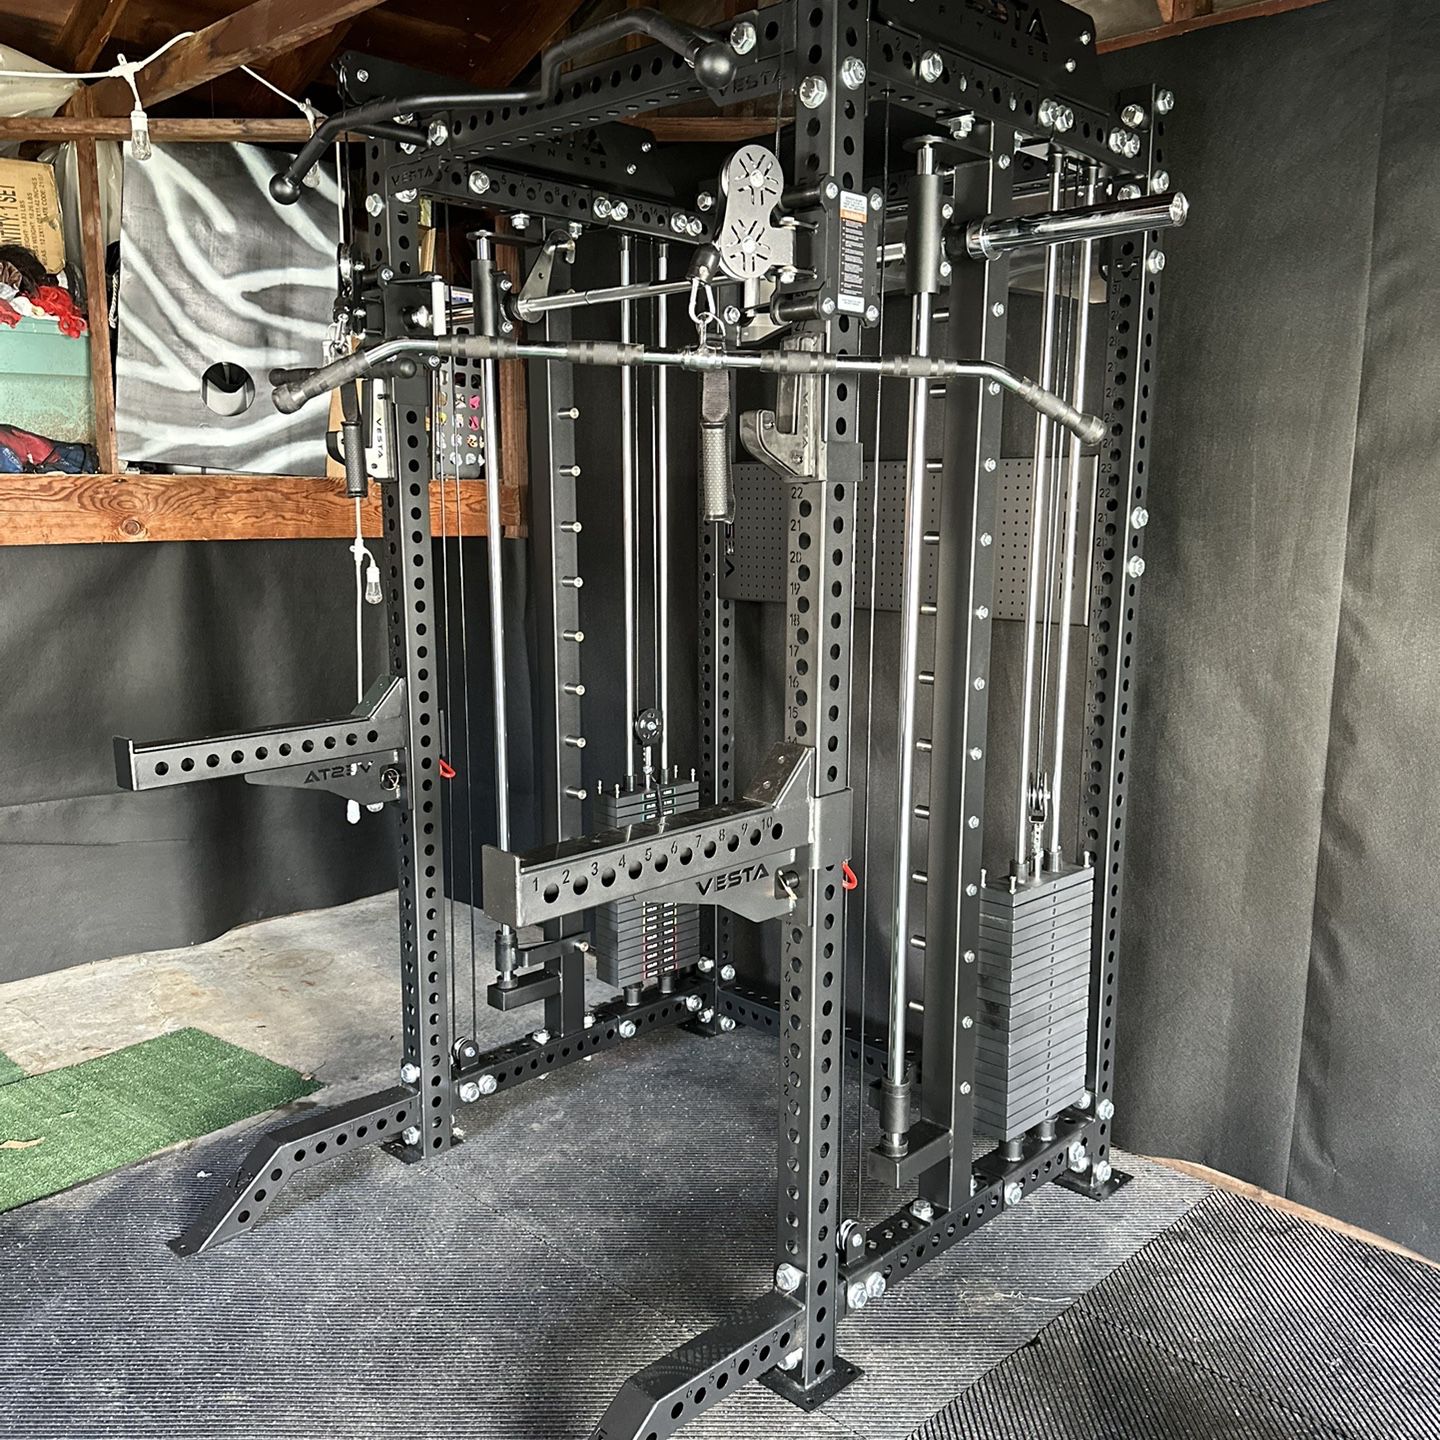 PRO SERIES Ultimate Half Rack Functional Trainer w/Smith Machine Bar | 400lb Stack | Gym Equipment | Fitness | Commercial | Squat Rack 